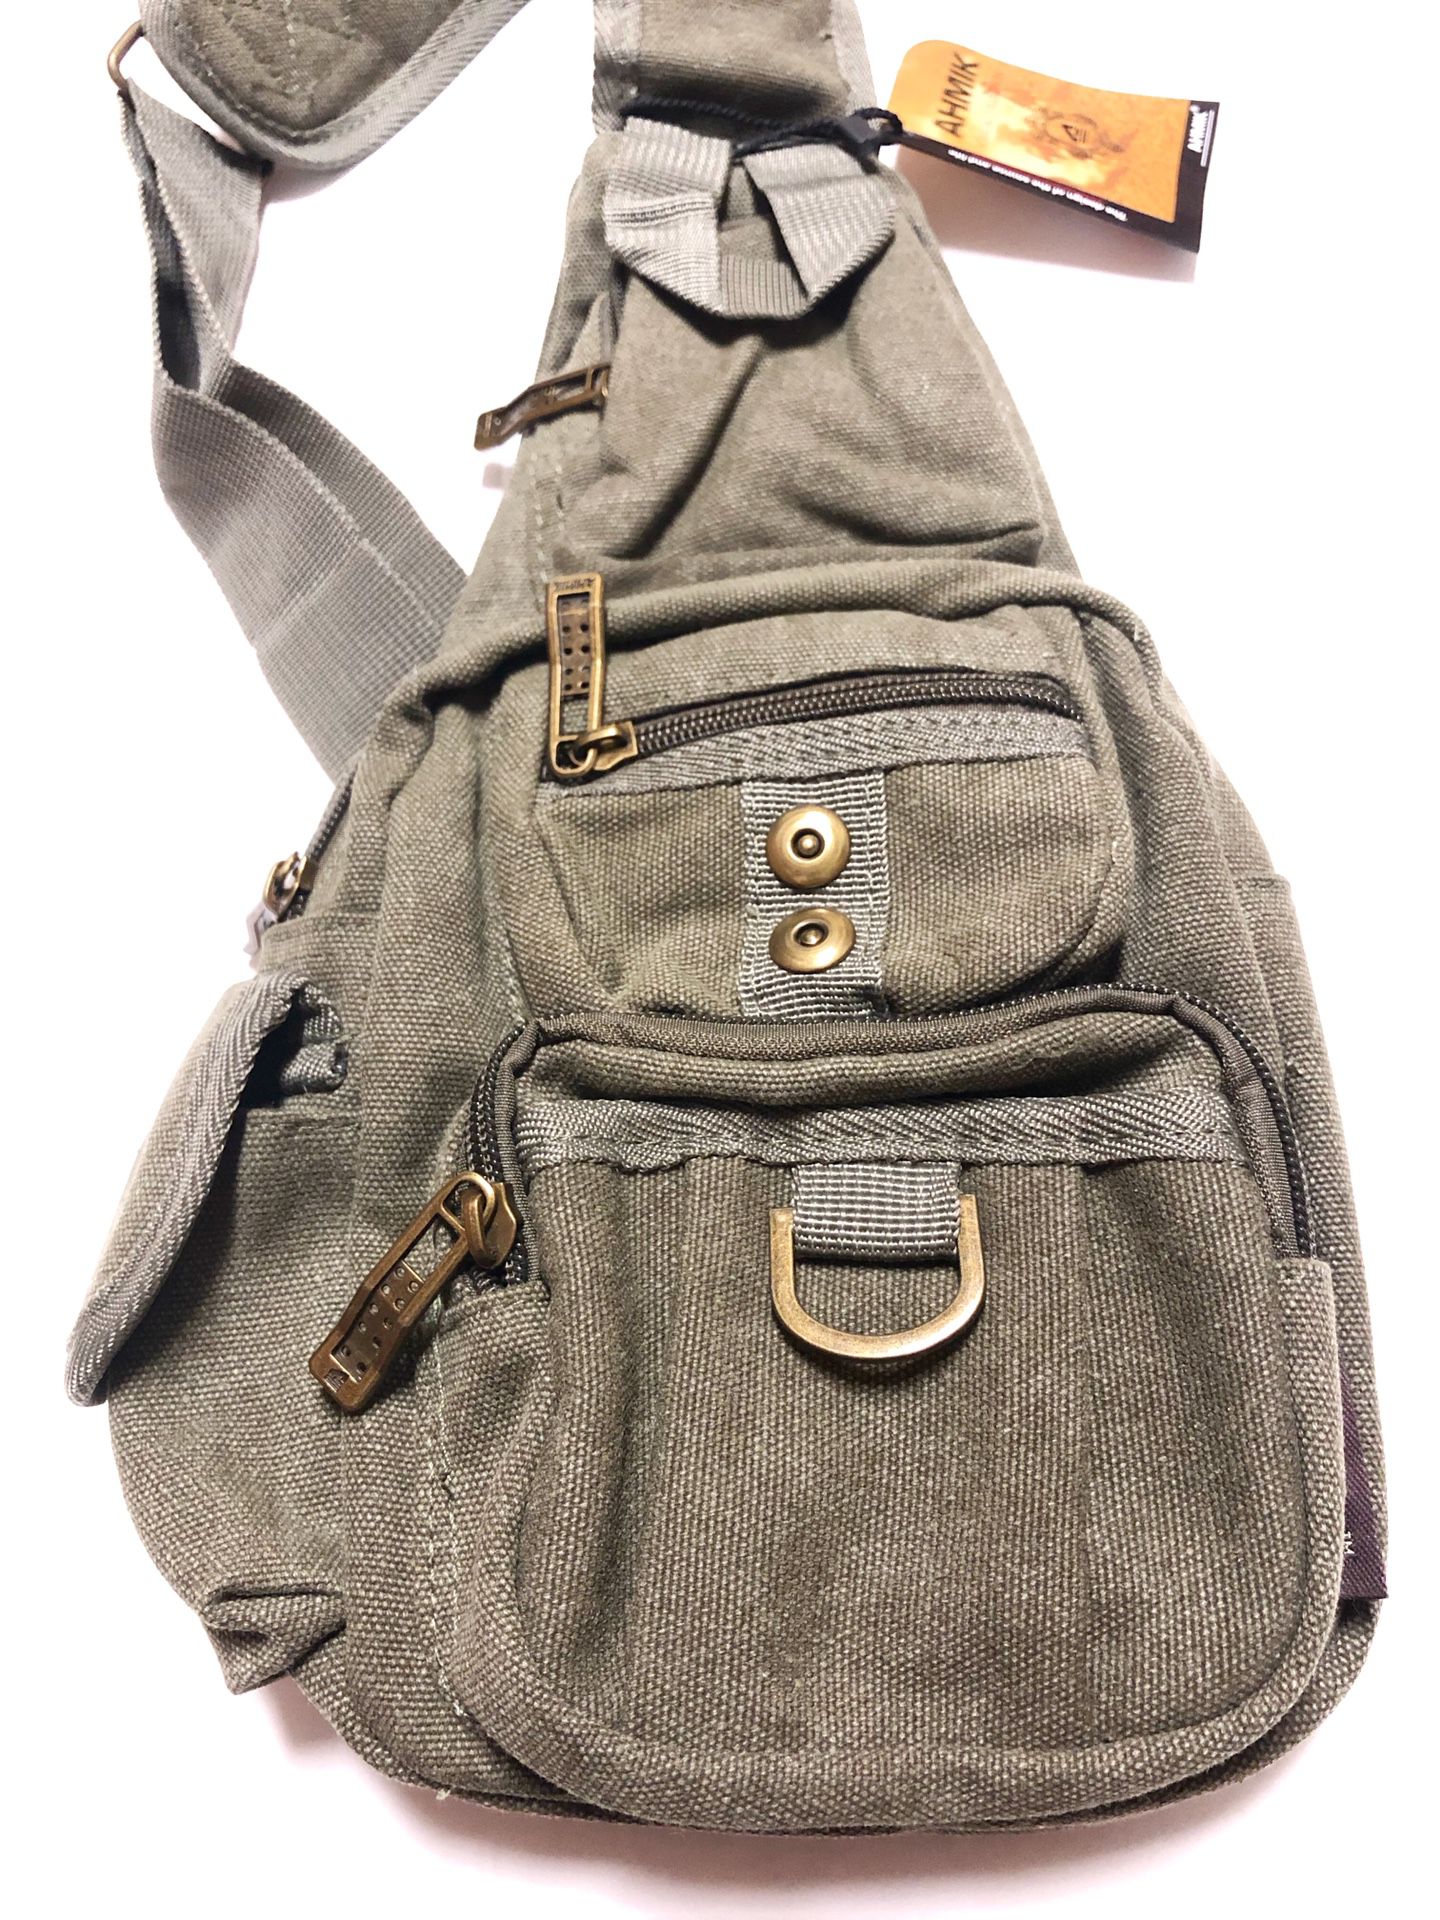 Coach West Pack Sling Backpack in Signature Canvas with Varsity Stripe for  Sale in Banning, CA - OfferUp